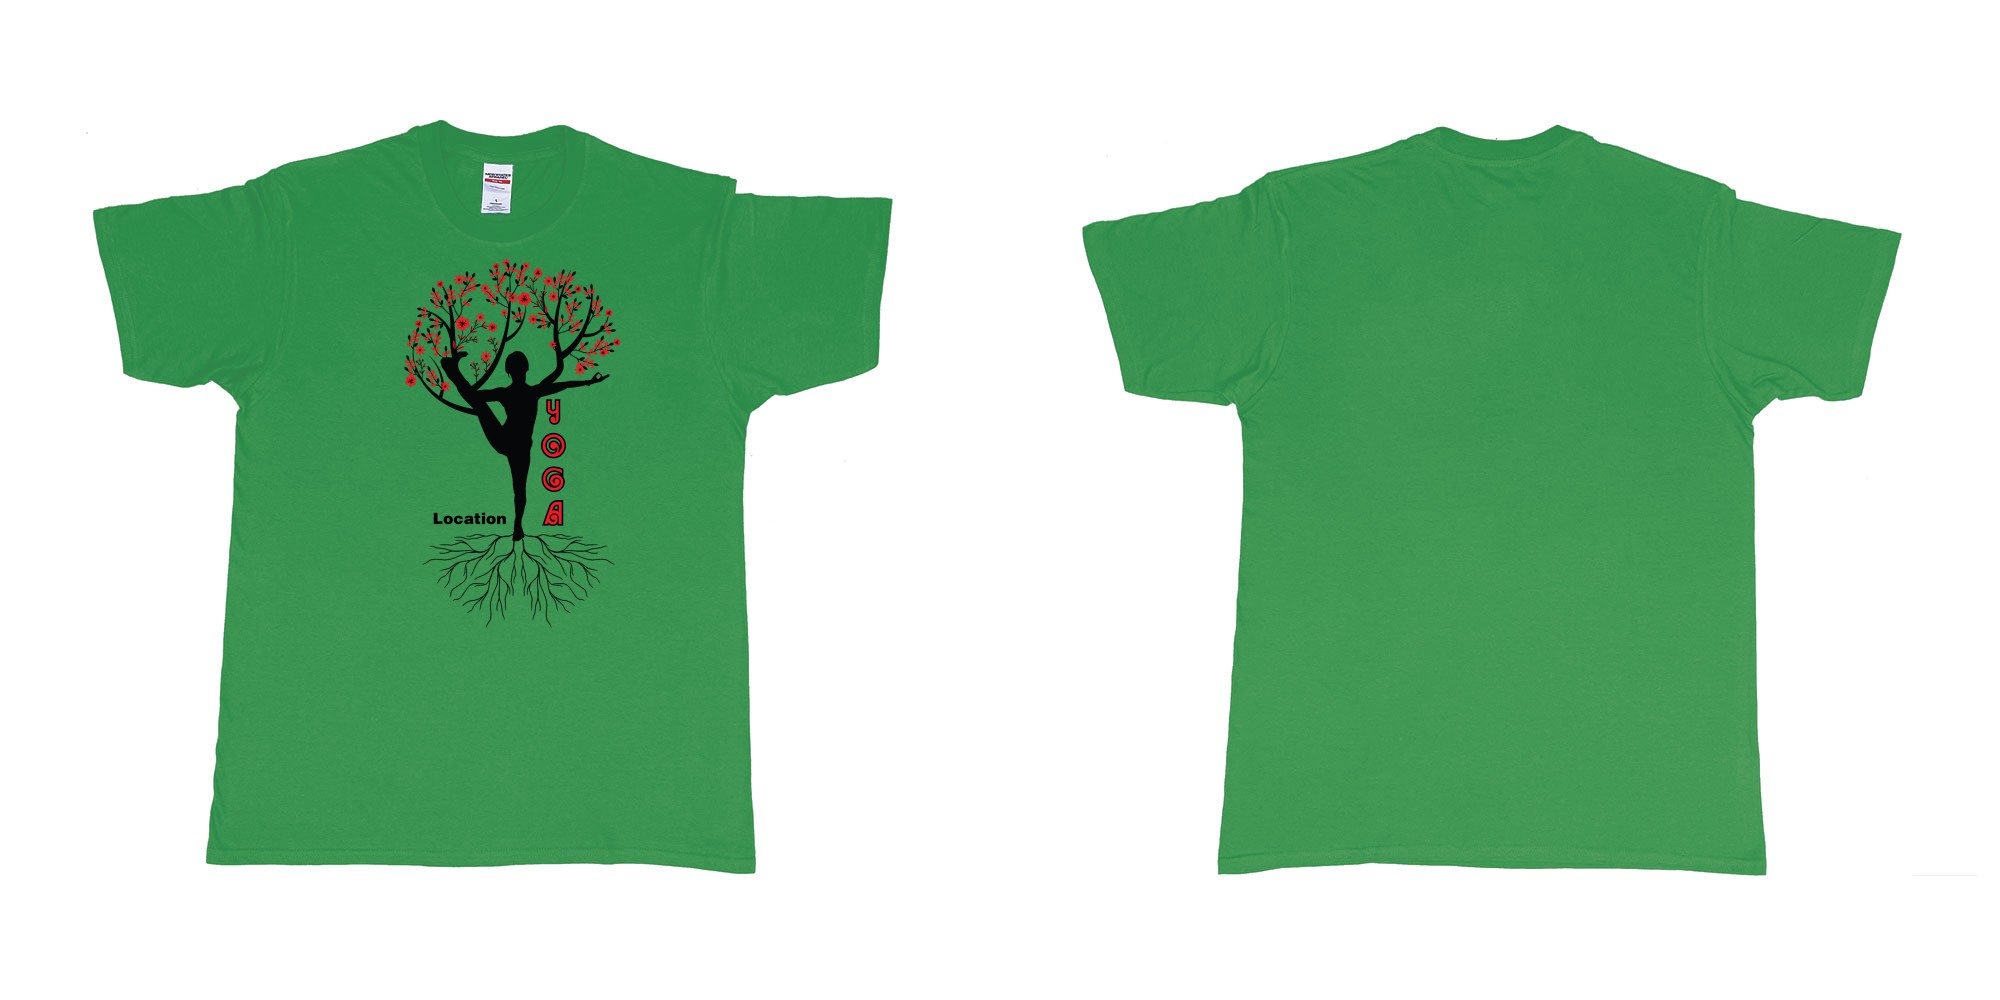 Custom tshirt design yoga tree of life is blooming own logo location design in fabric color irish-green choice your own text made in Bali by The Pirate Way